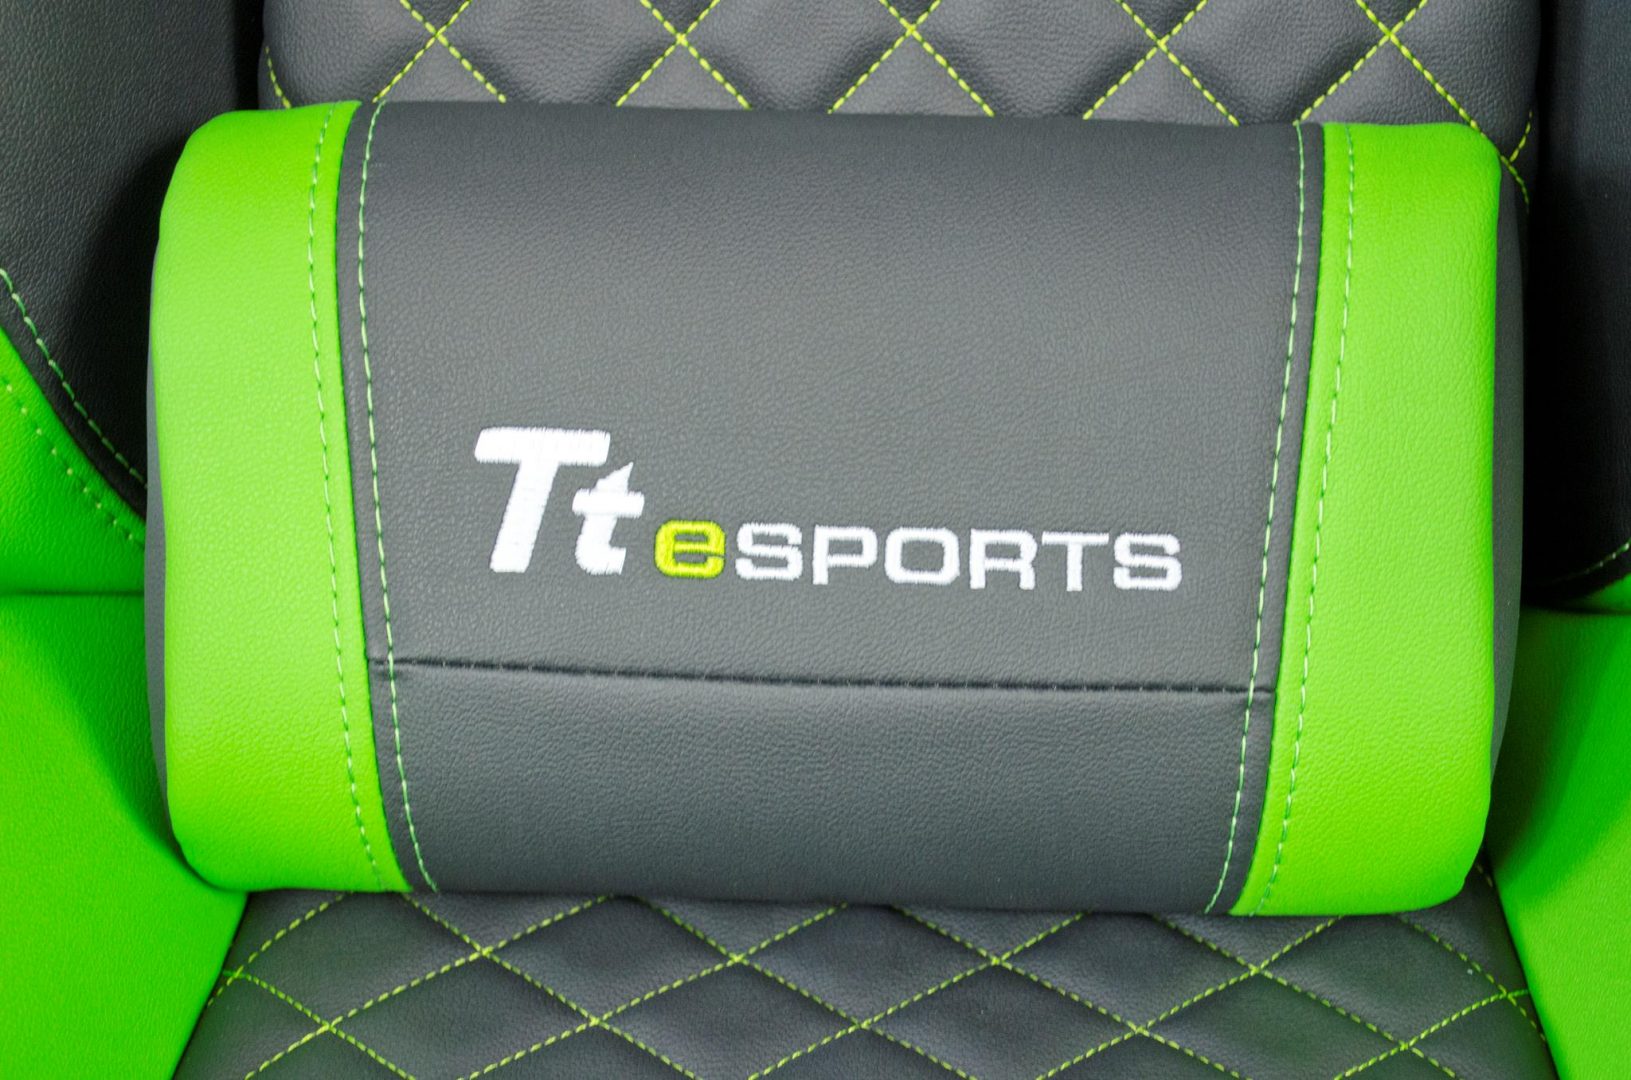 Tt eSports GT Comfort Gaming Chair Review